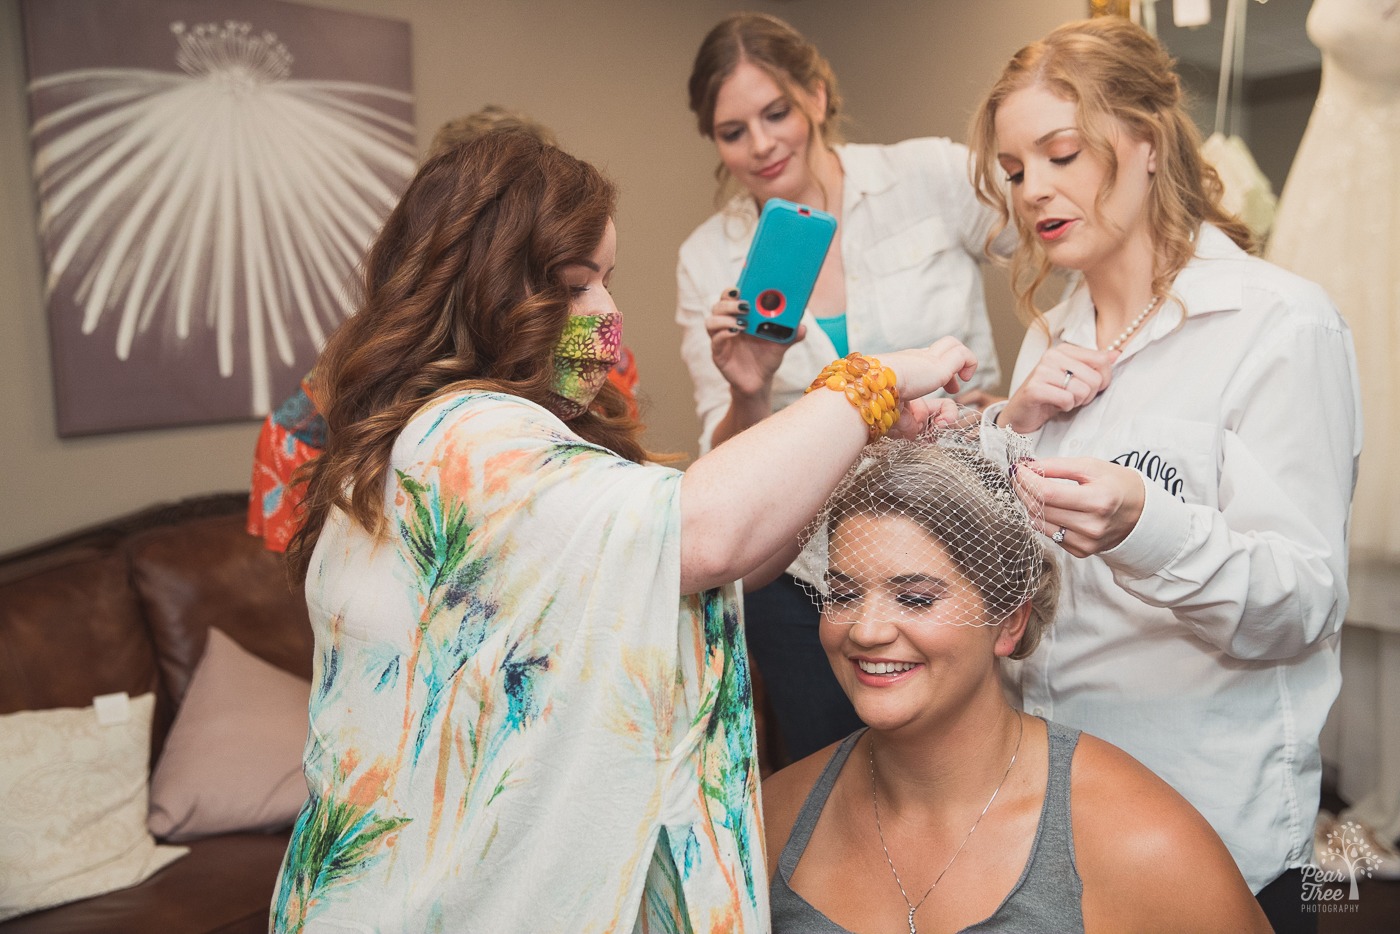 Sisters and hair stylist helping attach veil to bride's head